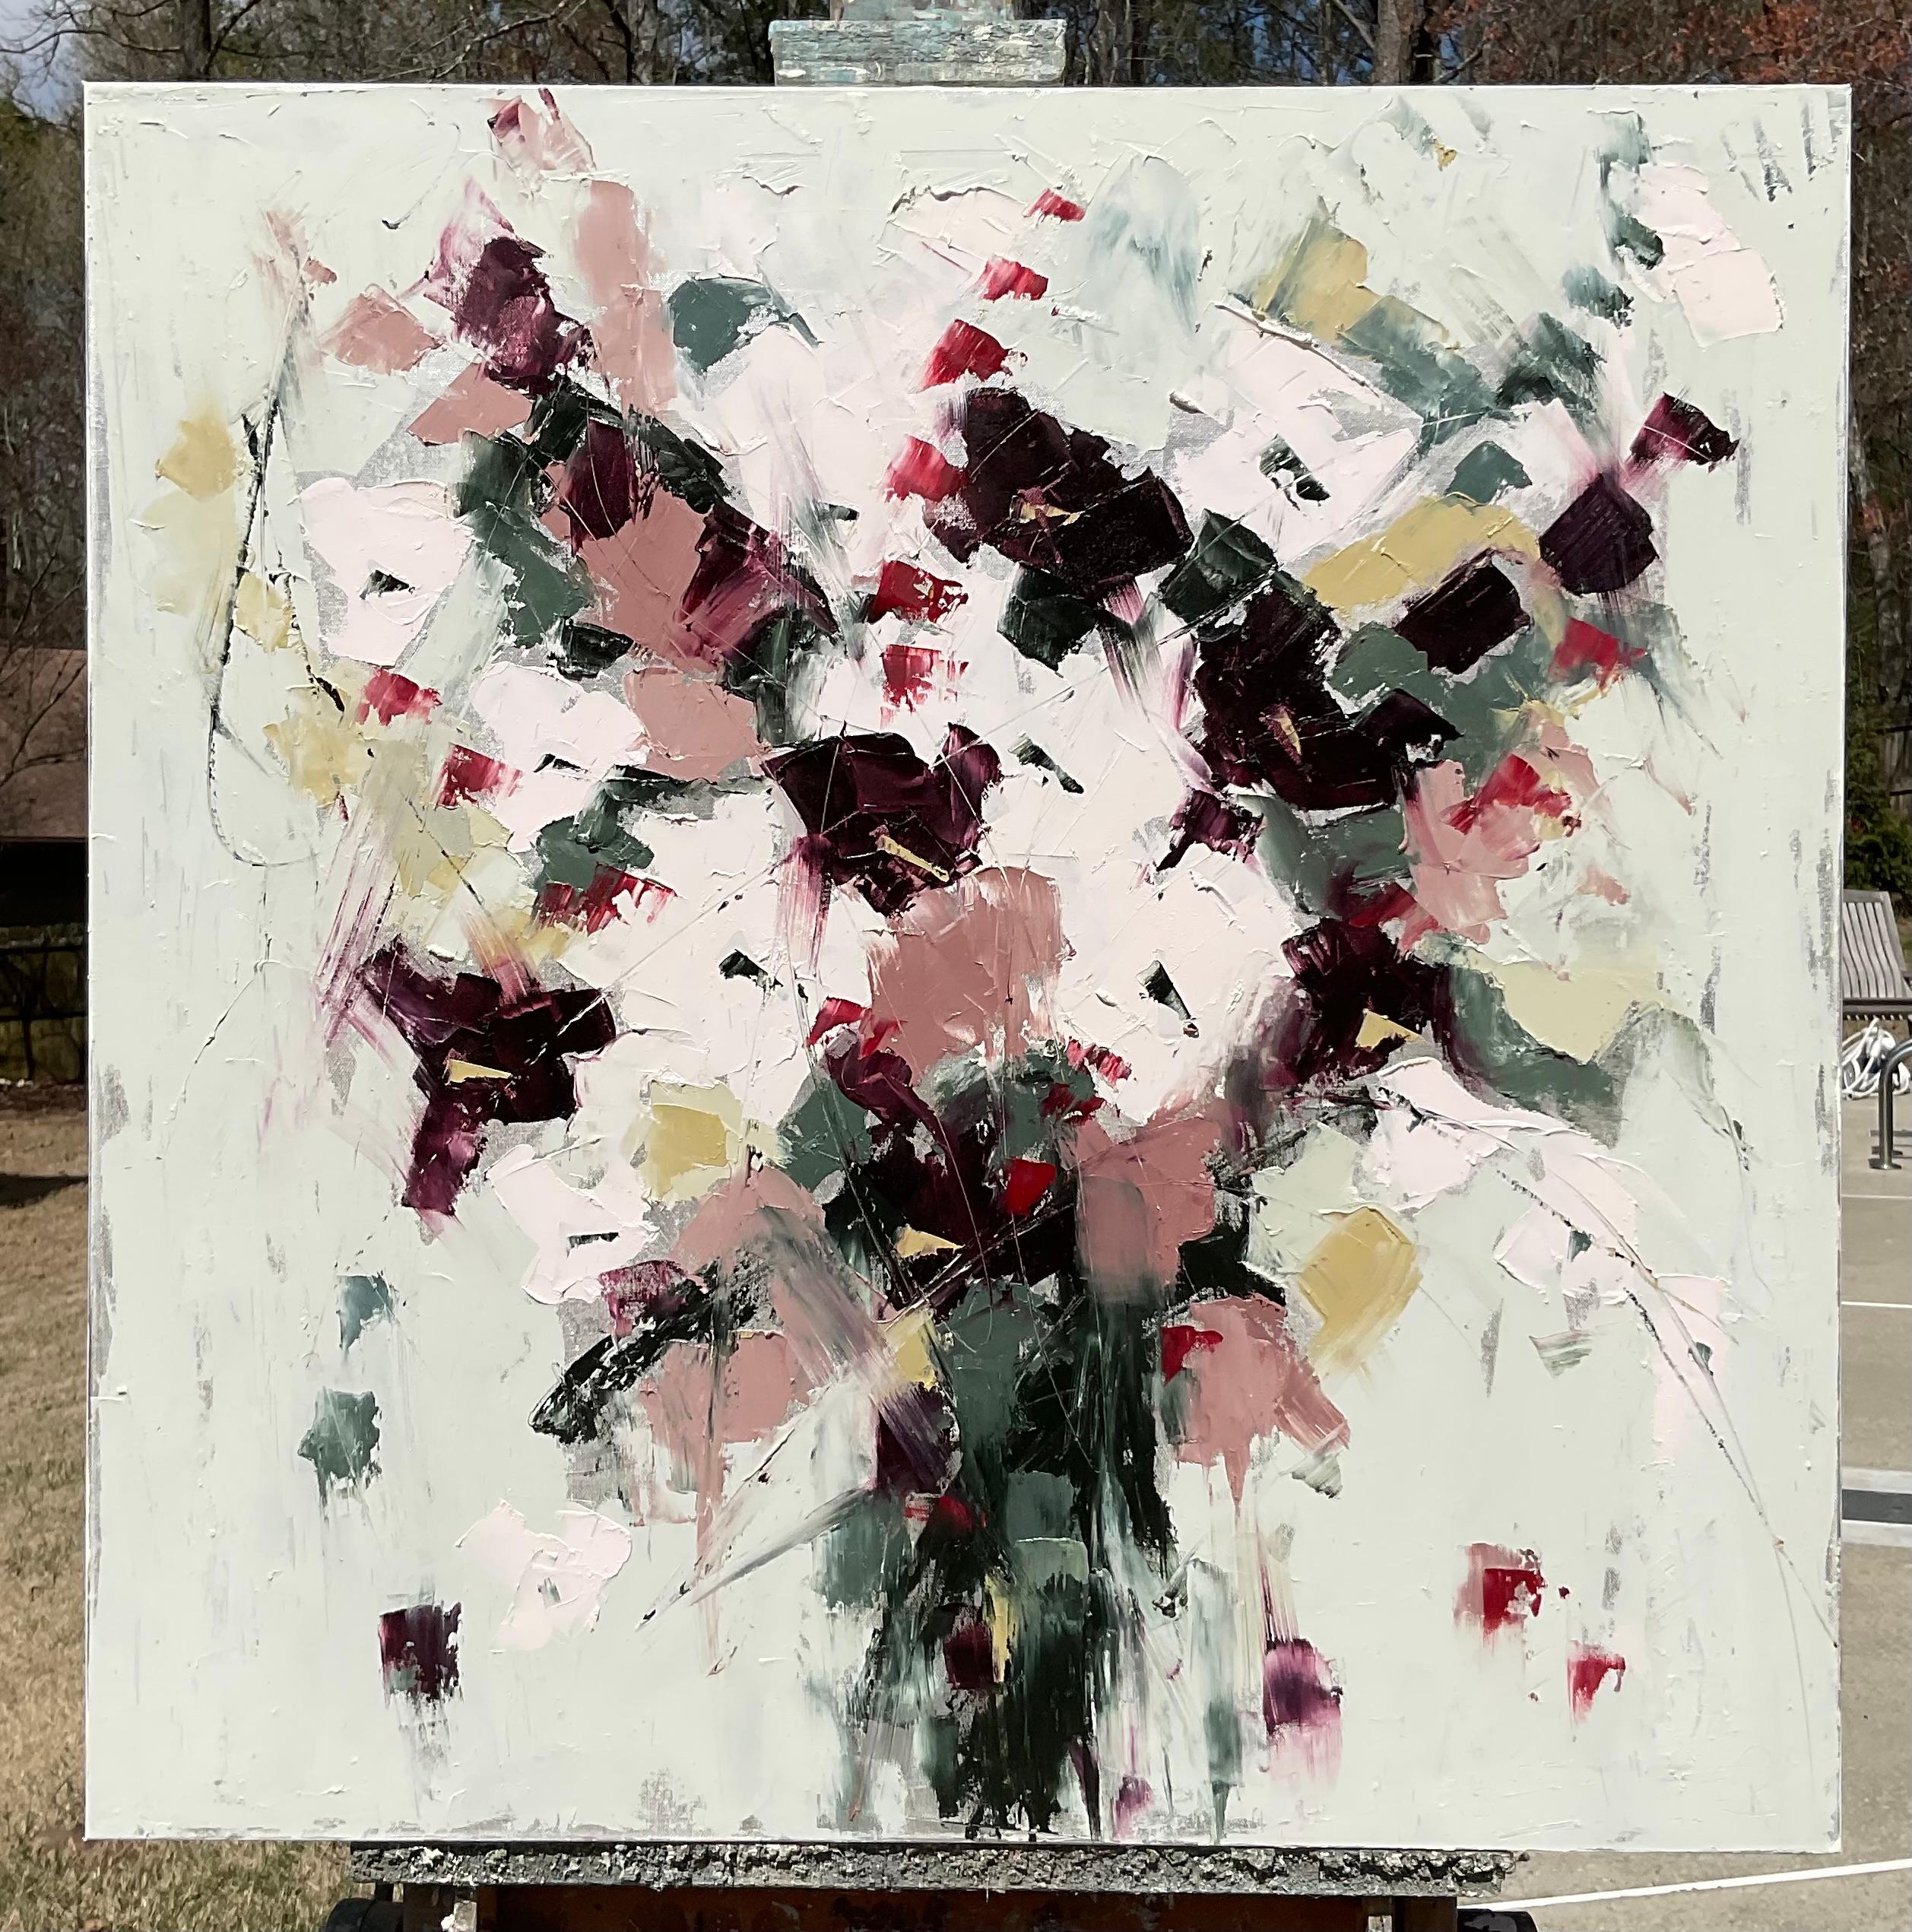 <p>Artist Comments<br>Deep magenta, blush, and lush greens cascade in this abstract floral painting. The vibrancy of the flowers stands out against the neutral background, creating a sense of movement and life. The combination of various palette